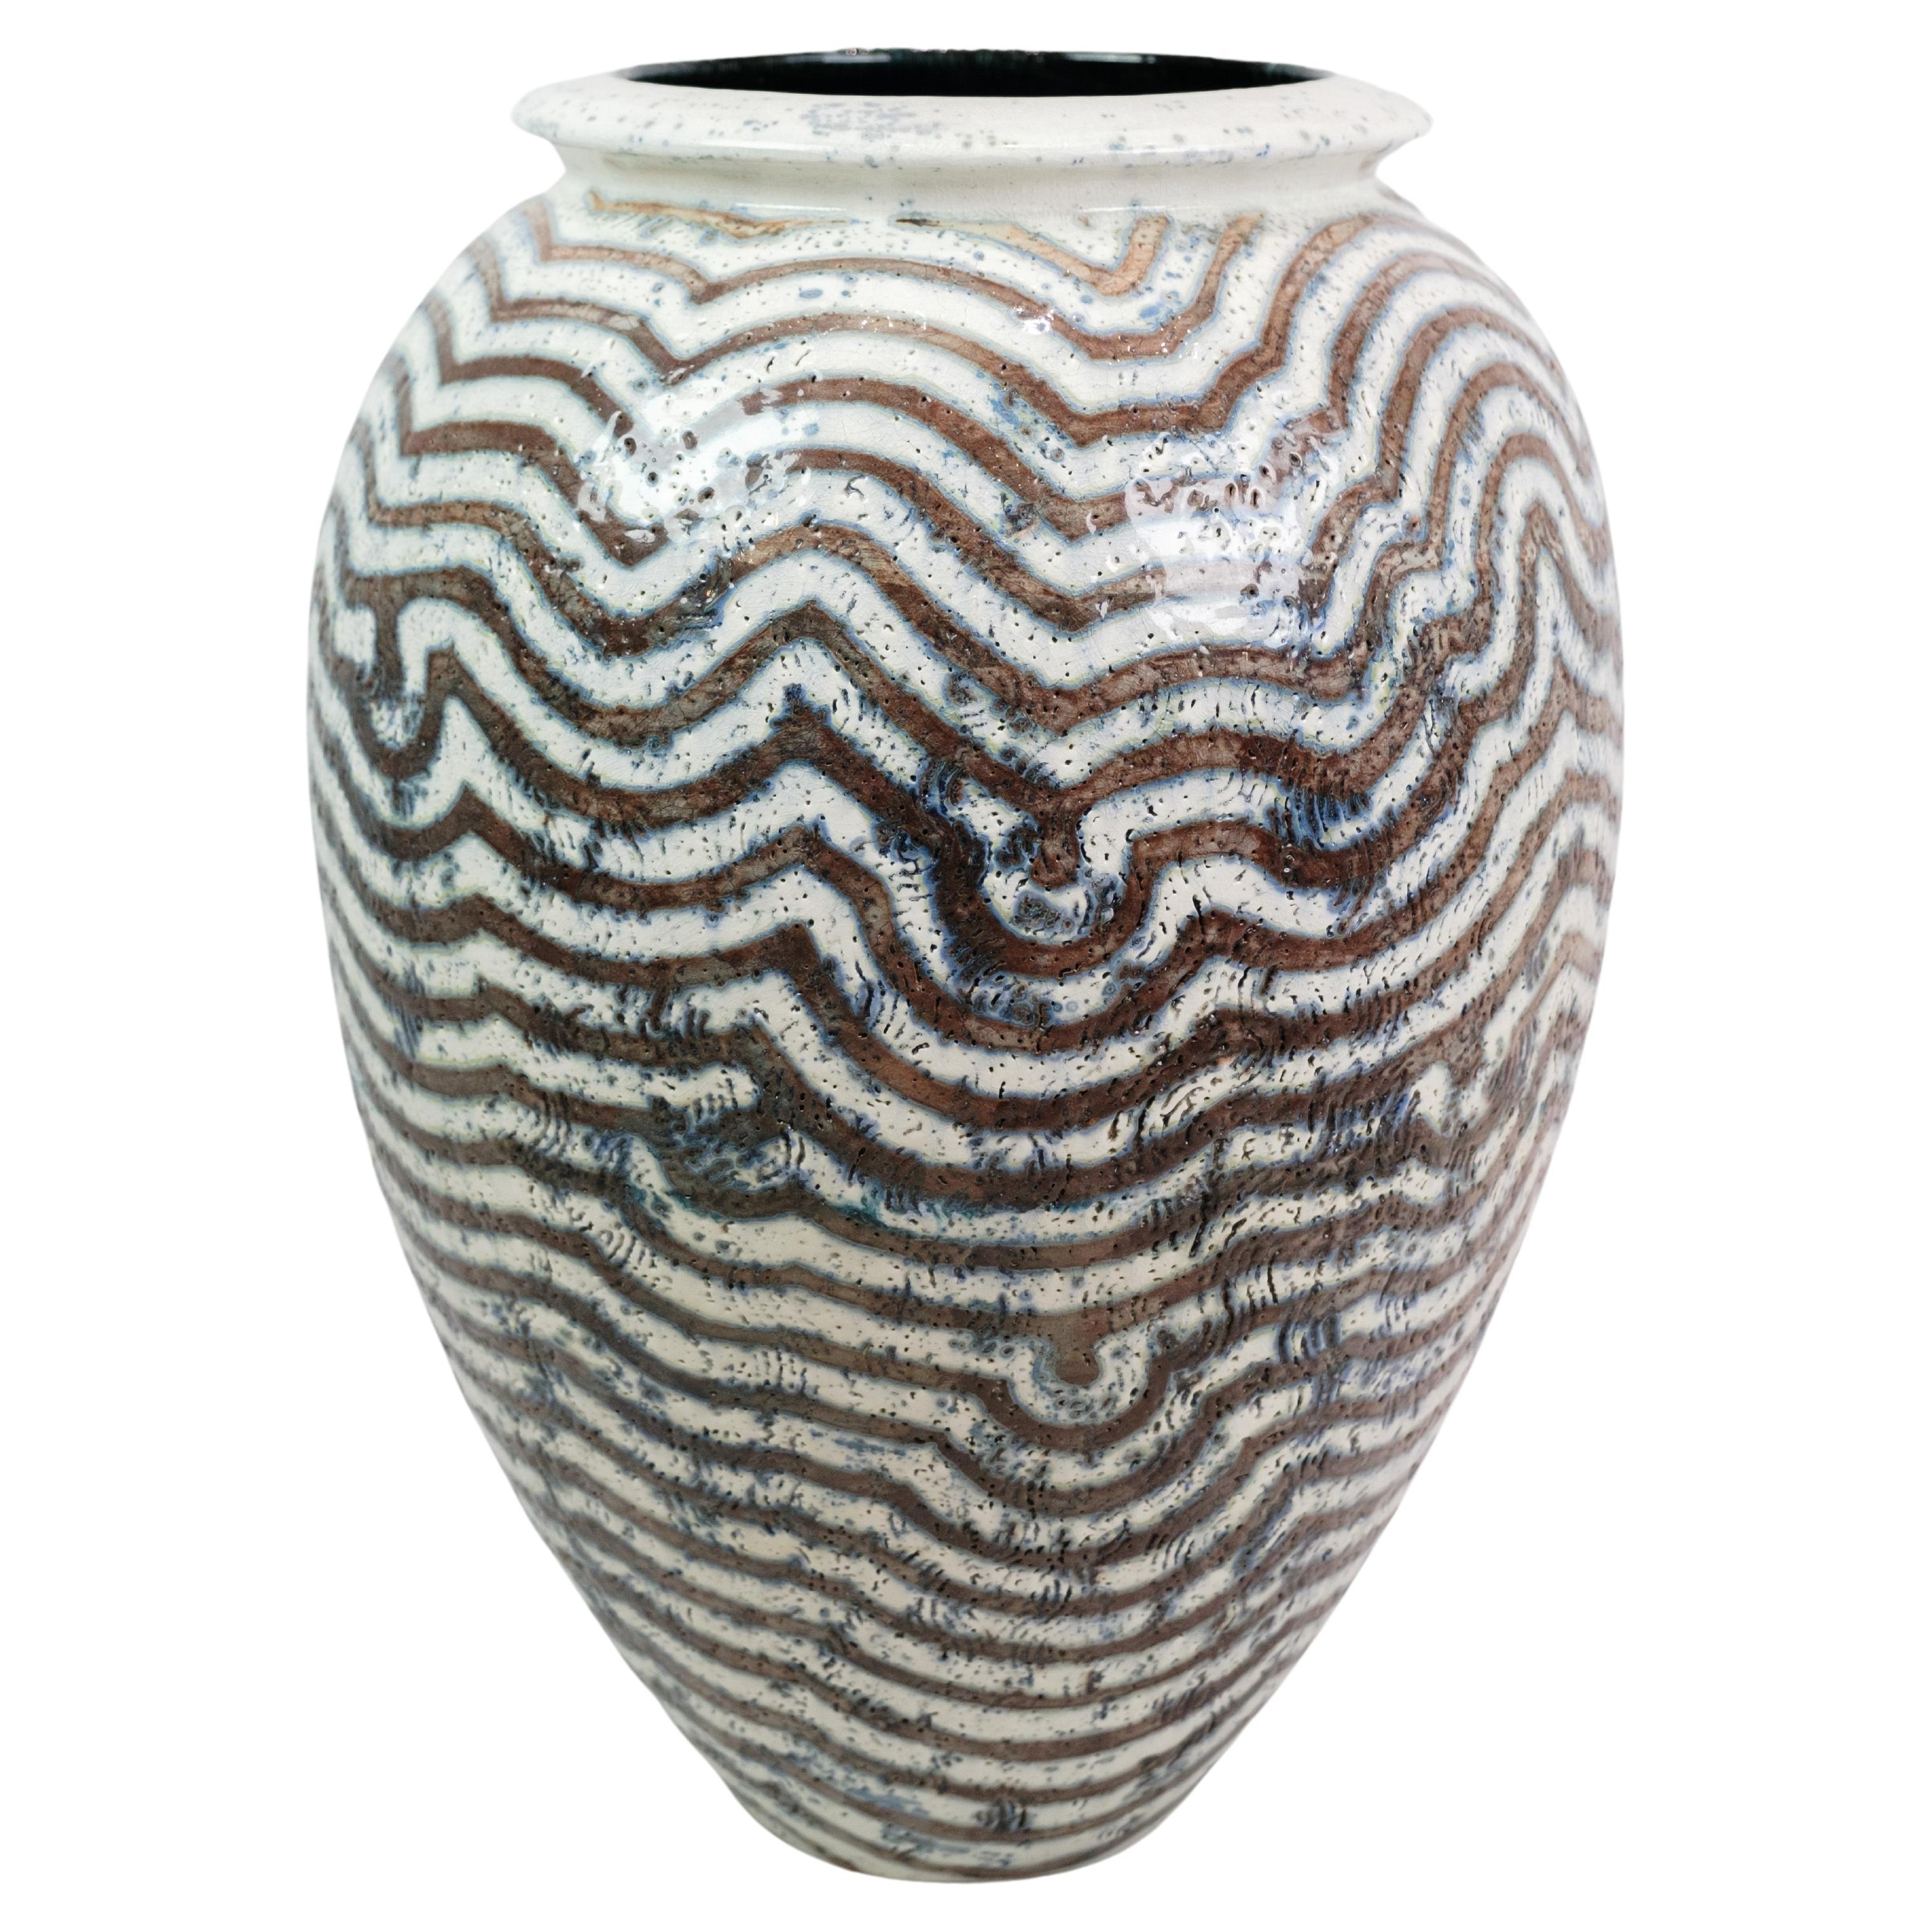 Stoneware Floor Vase In Blue, Grey and White Designed By Peter Weiss From 1980s